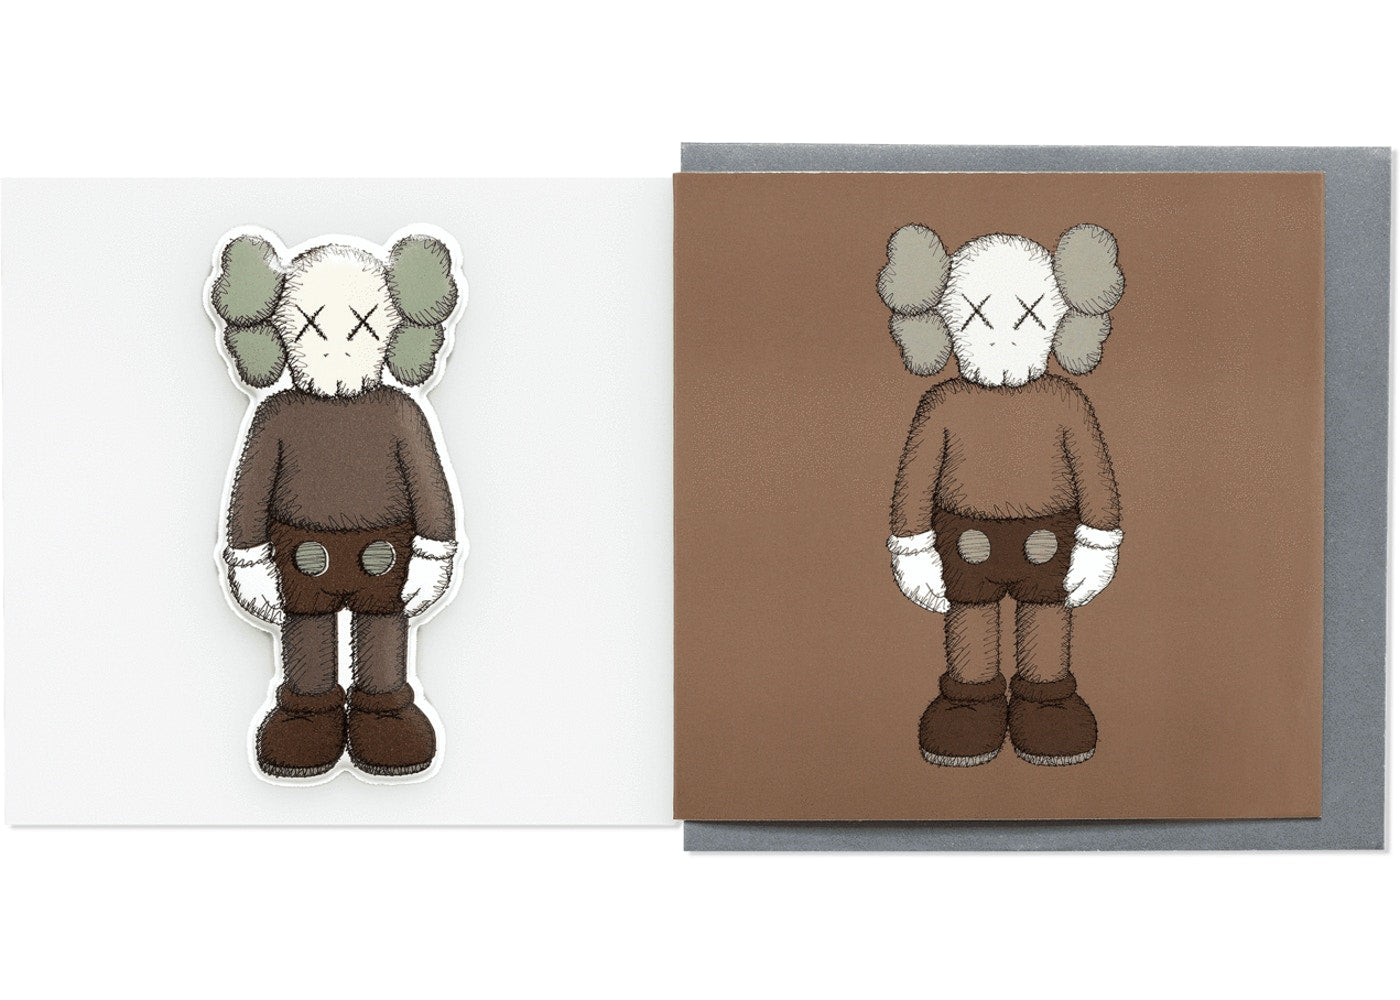 KAWS x NGV Companion Greeting Card with Puffy Sticker (Brown), 2019